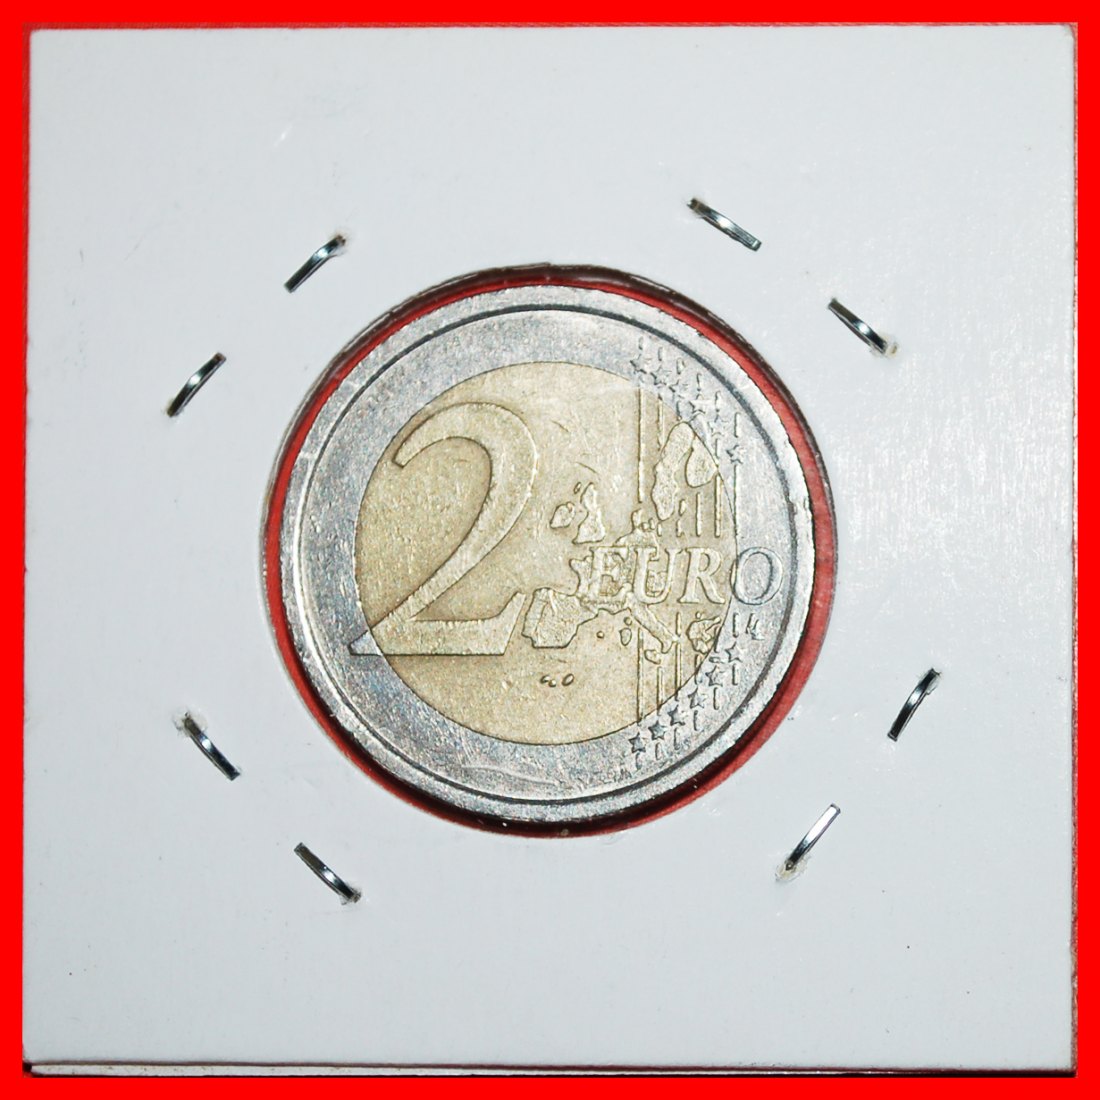  * SKI: ITALY★ 2 EURO 2006! IN HOLDER ★LOW START ★ NO RESERVE!   